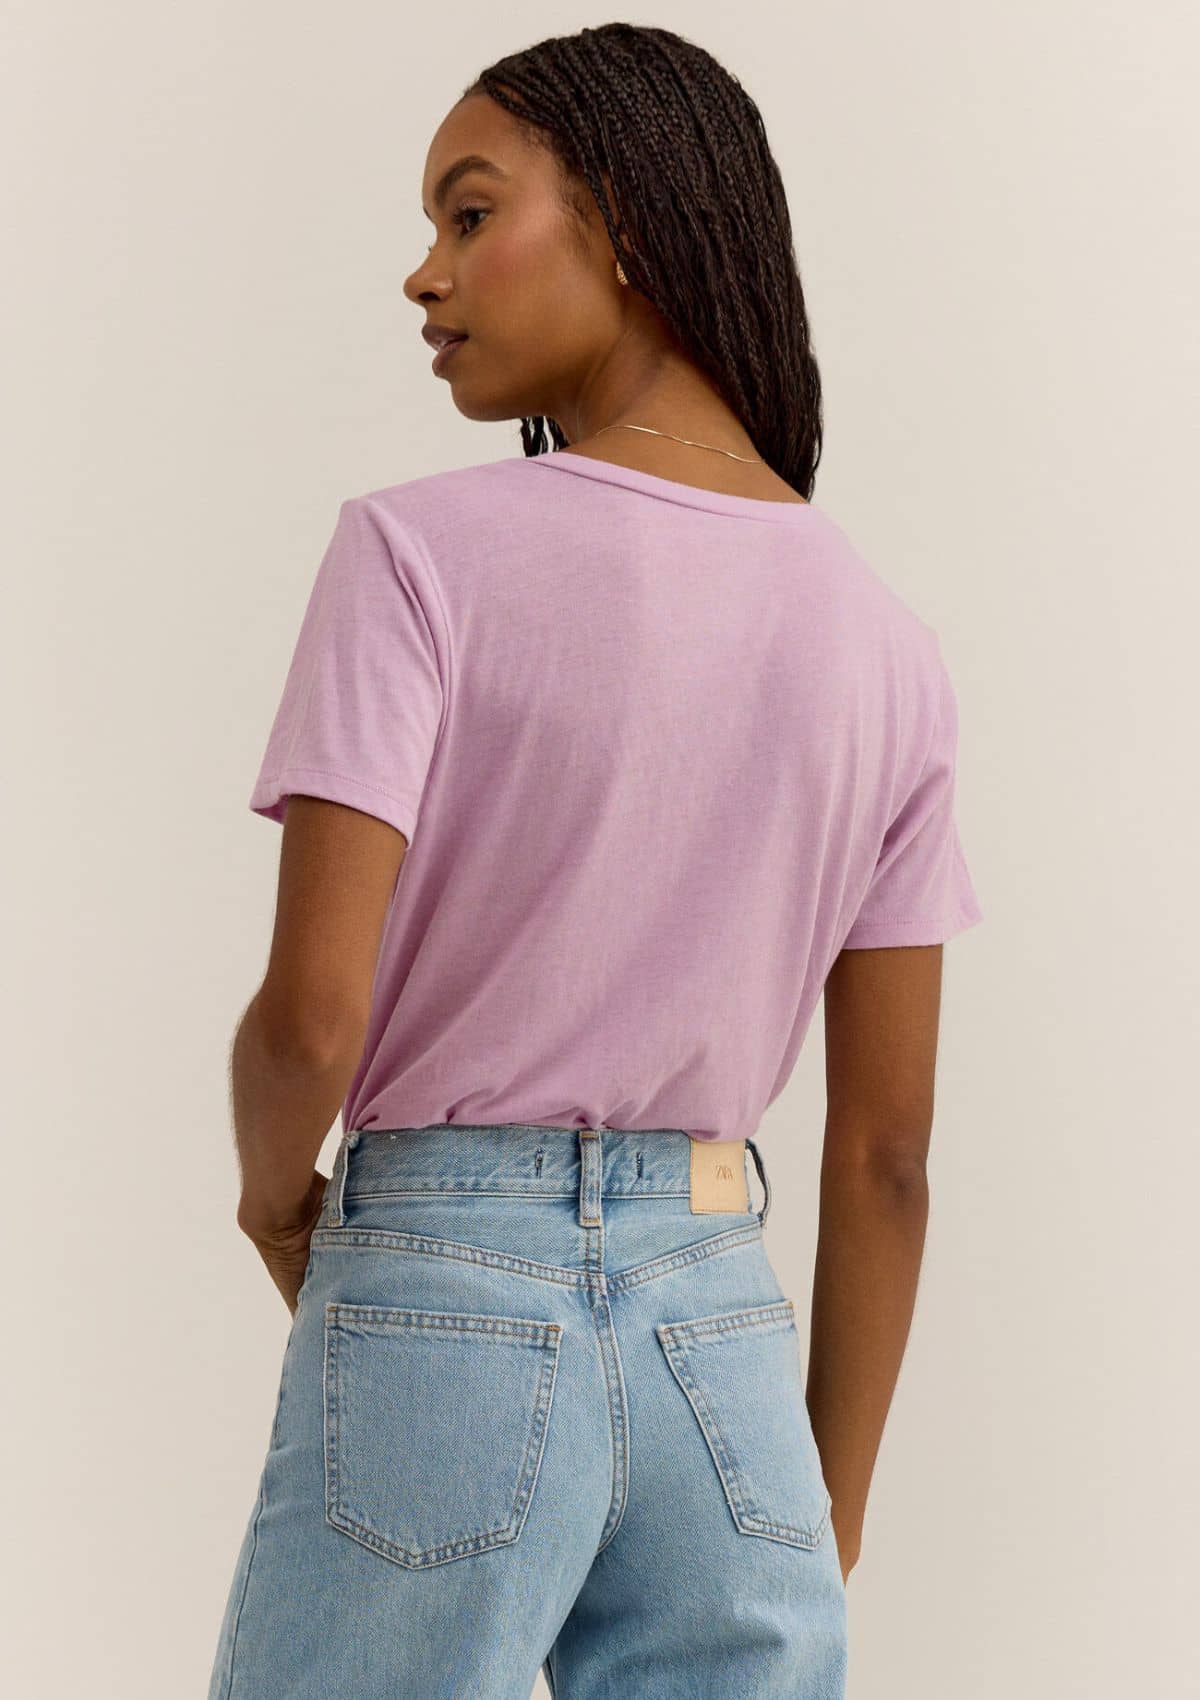 The Pocket Tee - Washed Orchid -Z SUPPLY- Ruby Jane-